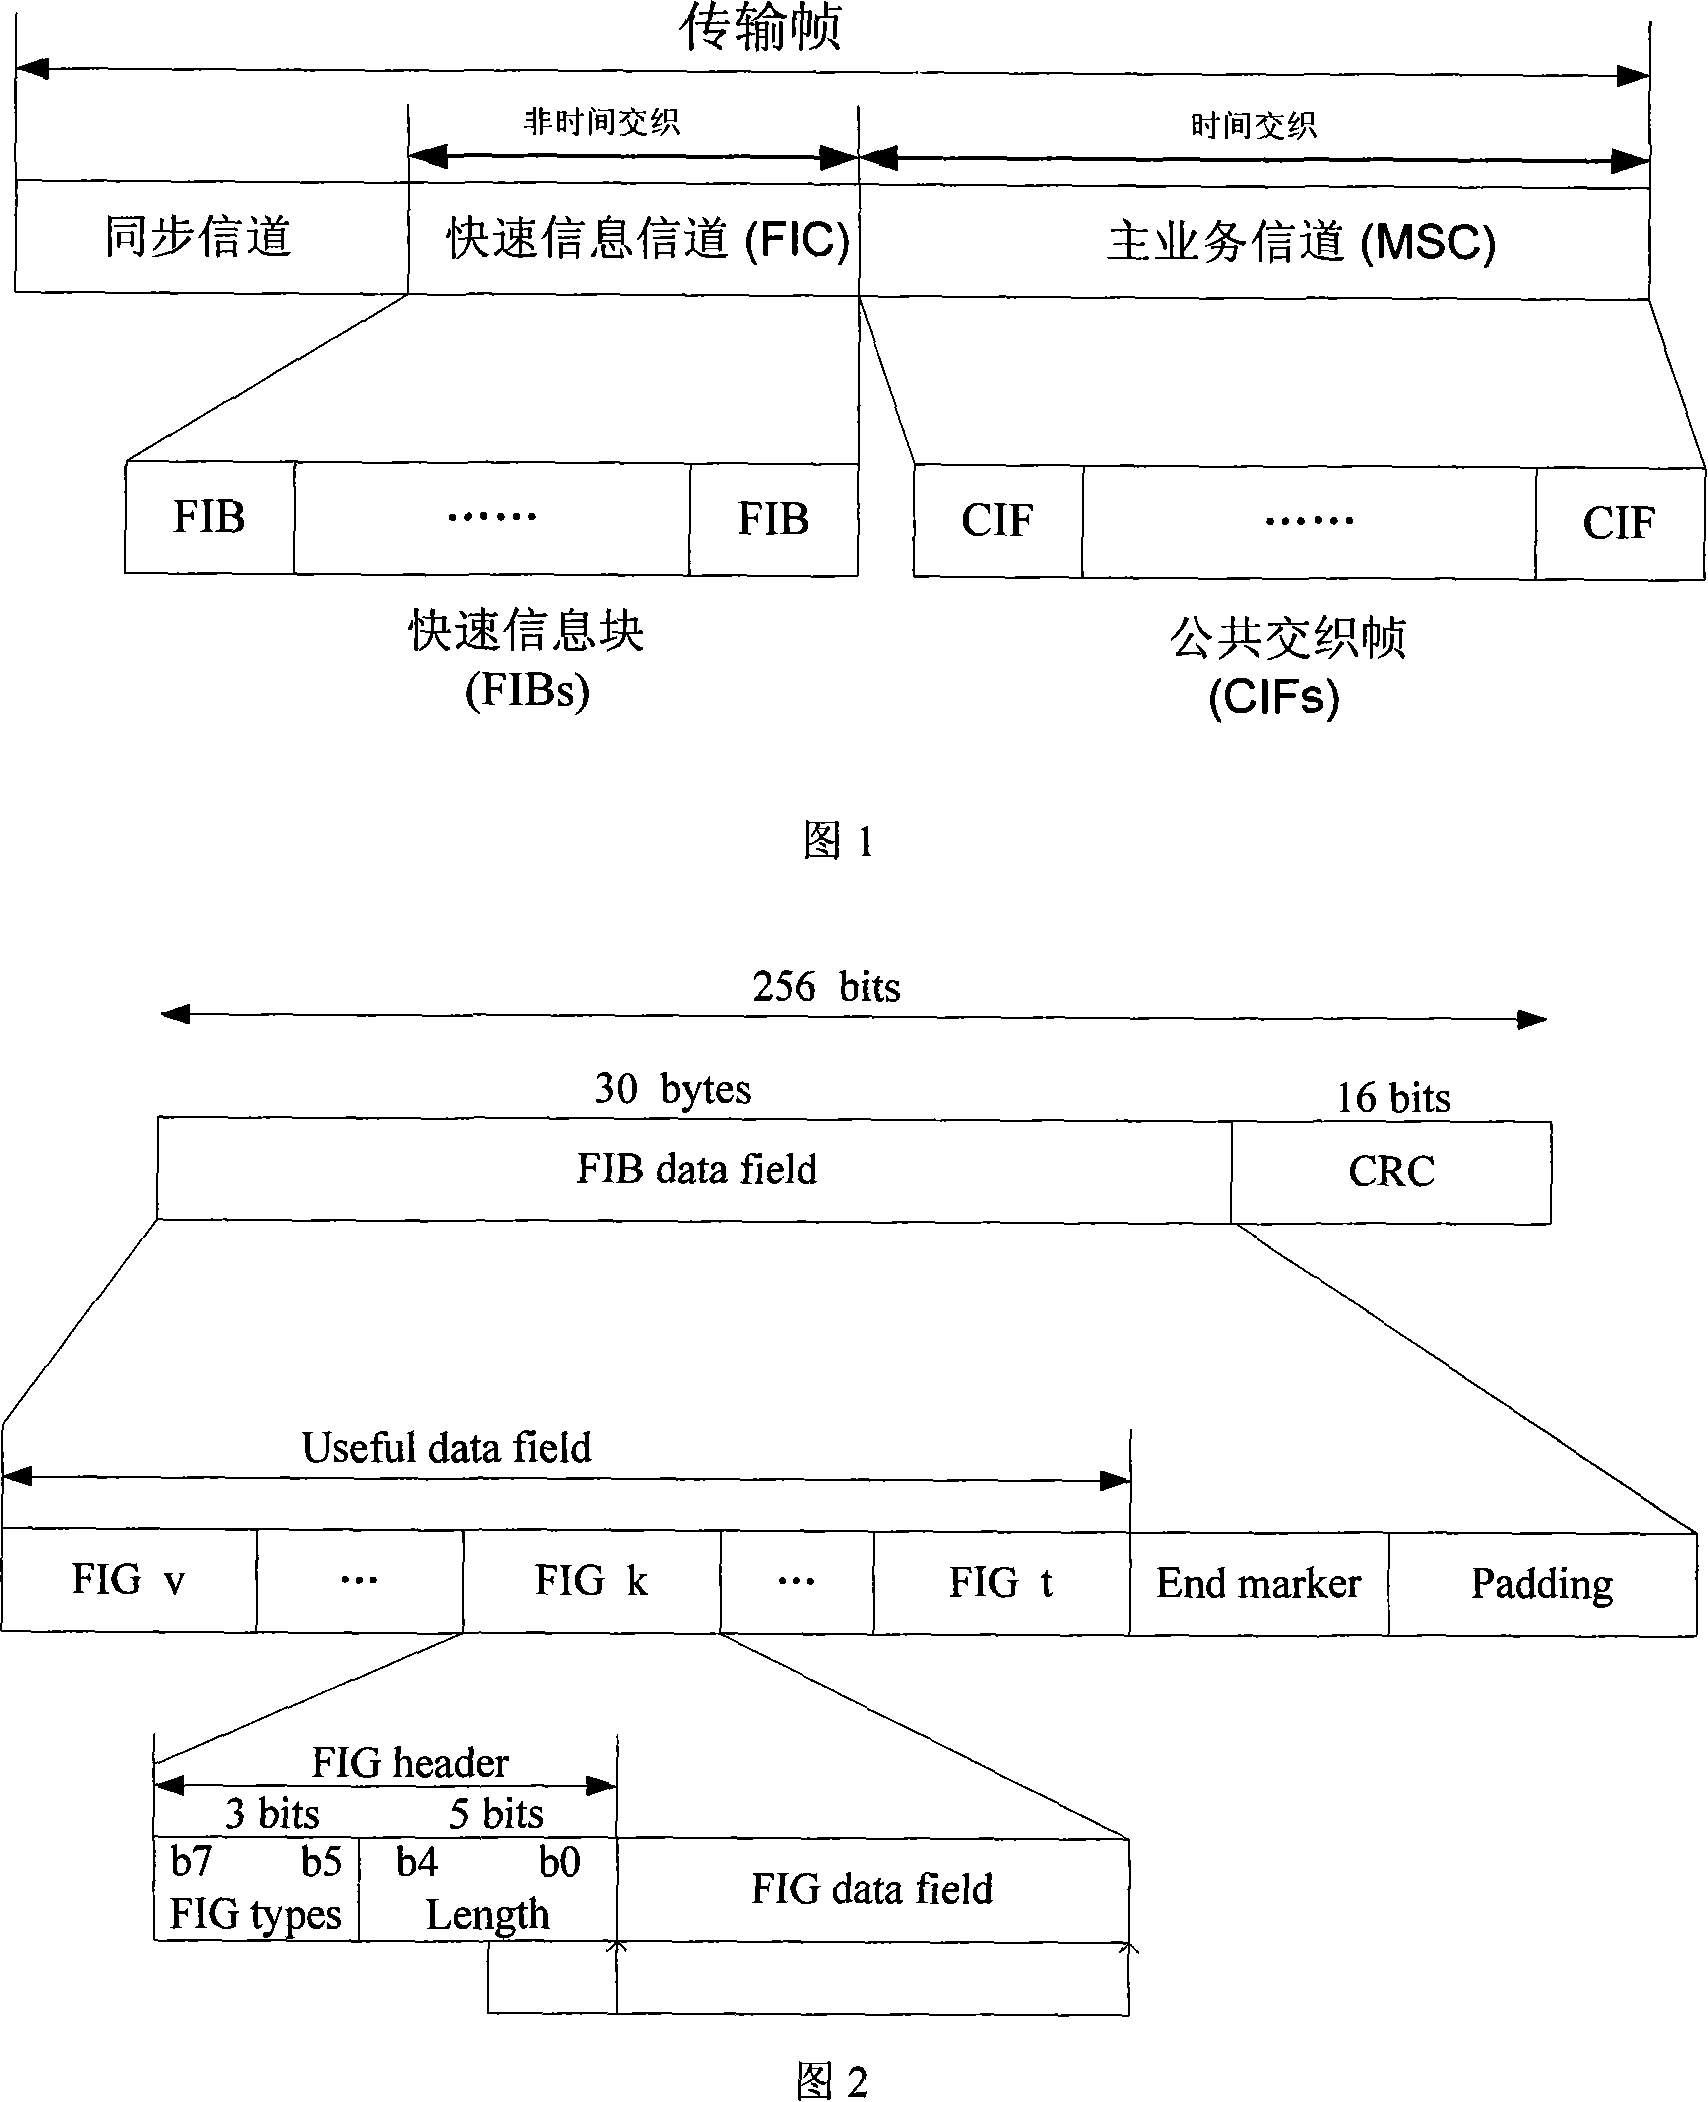 Design method for FIC new configuration in T-MMB system compatible with DAB